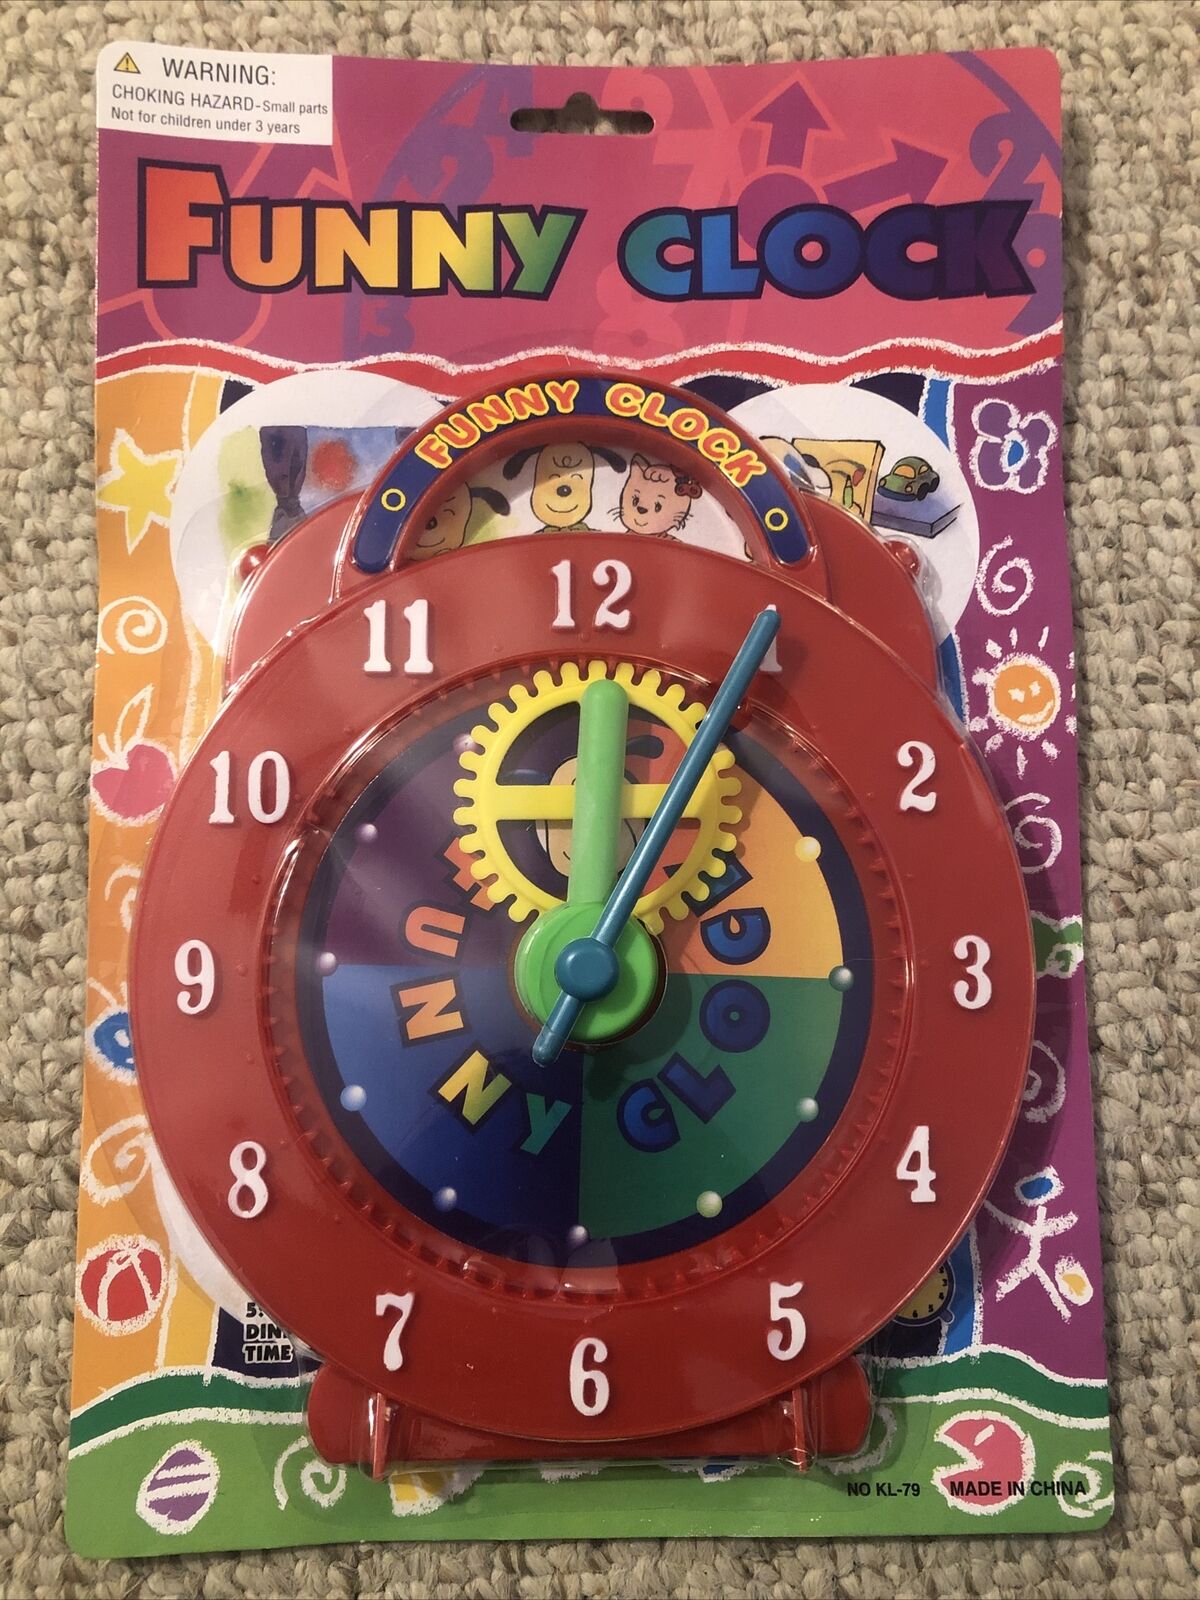 Teaching Time Clock Child Guidance Toys Learn to tell Time Funny Clock 7” NEW!